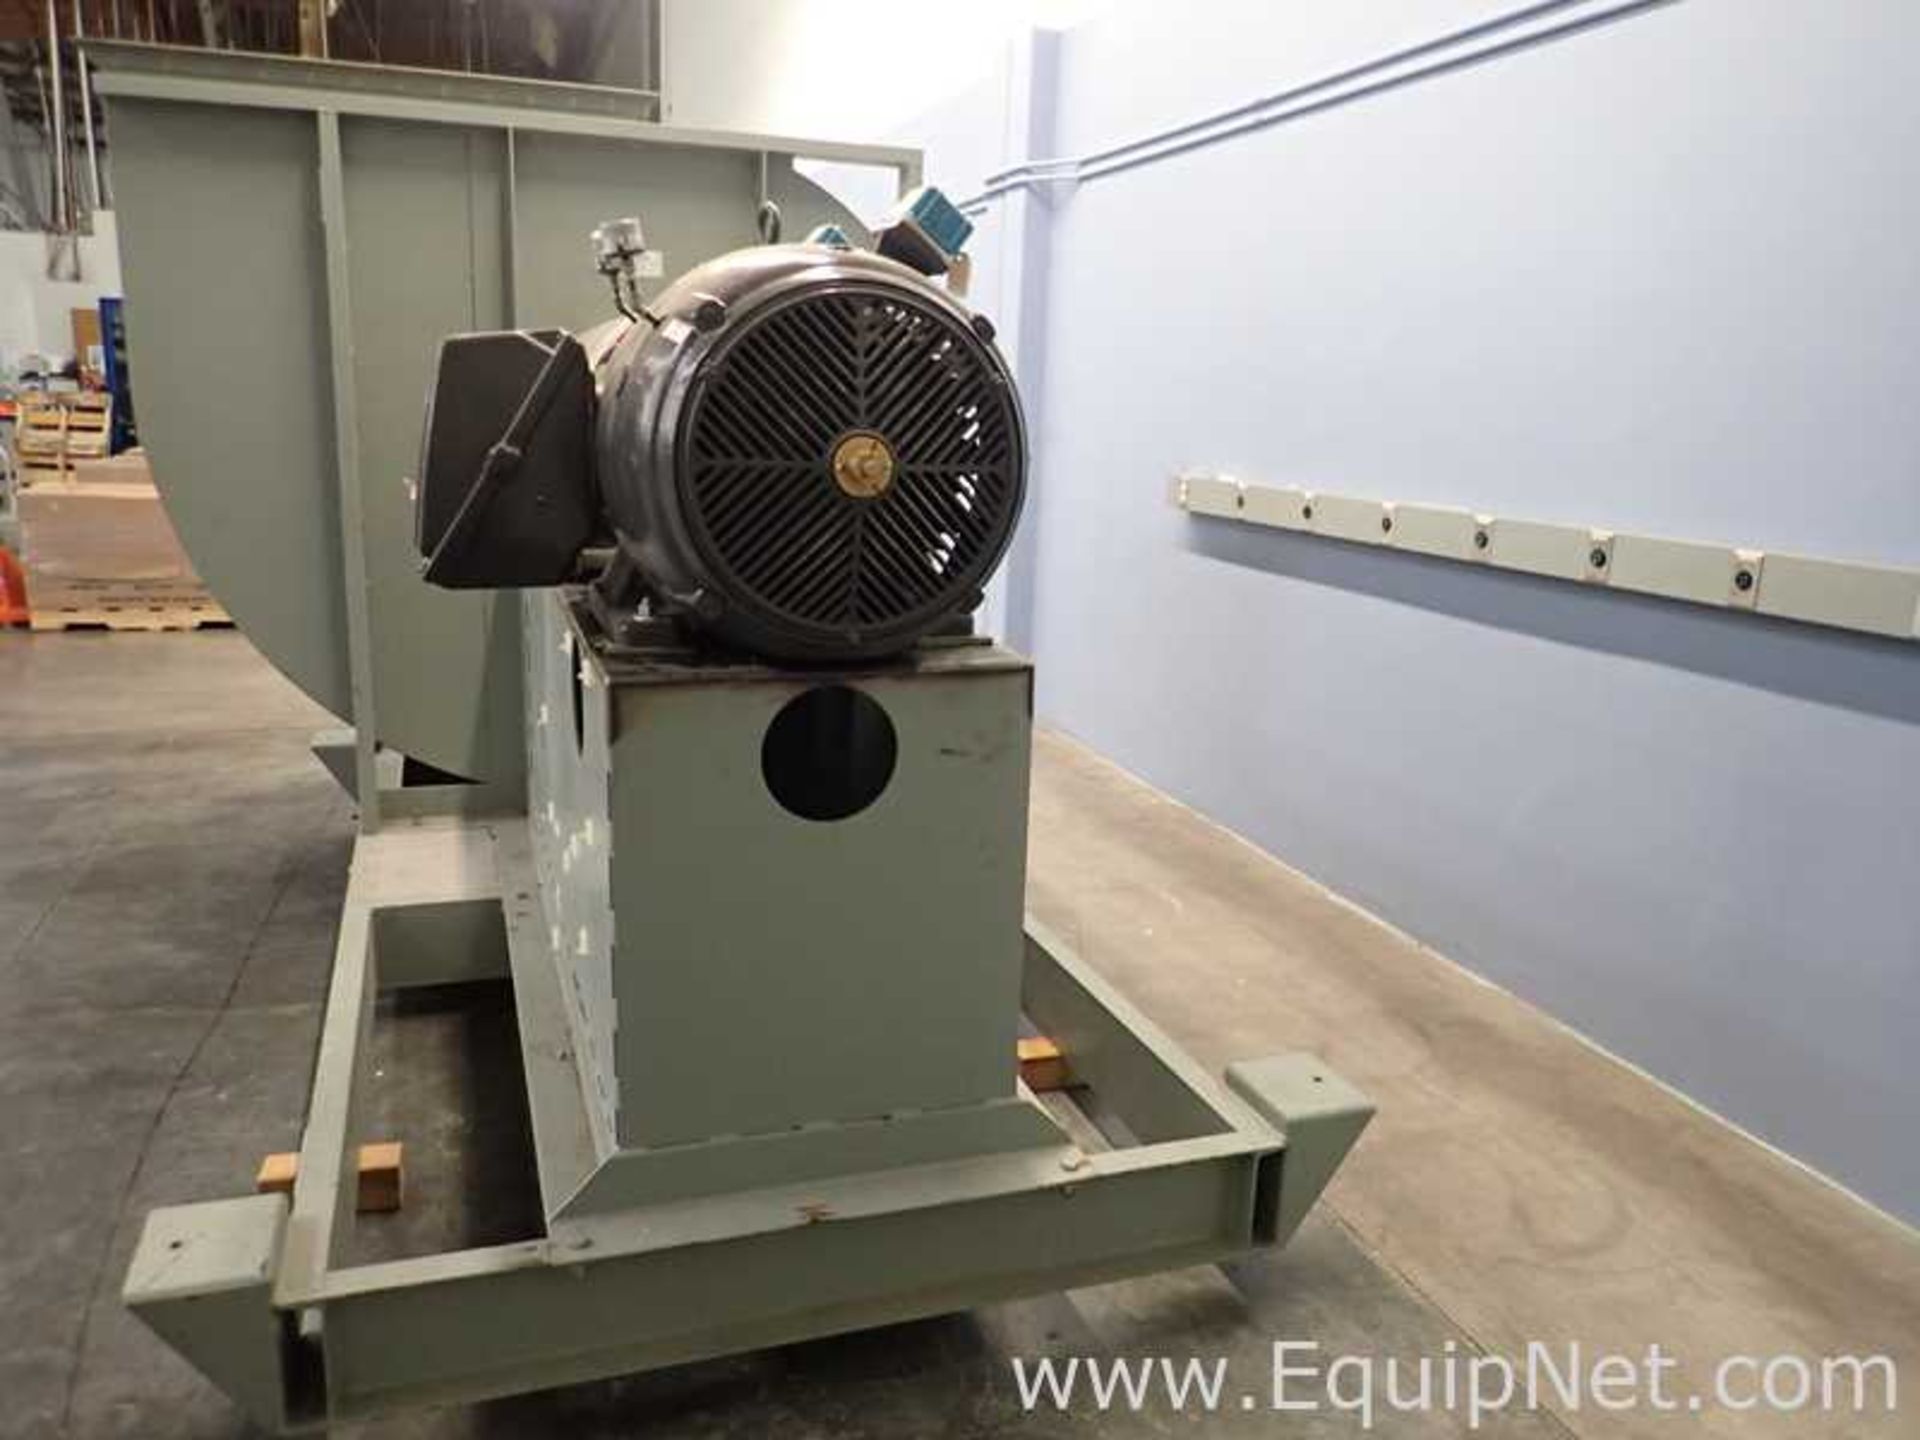 Pace Company CL 44ARRG8 General Air Handler Fan and Motor - Image 10 of 47